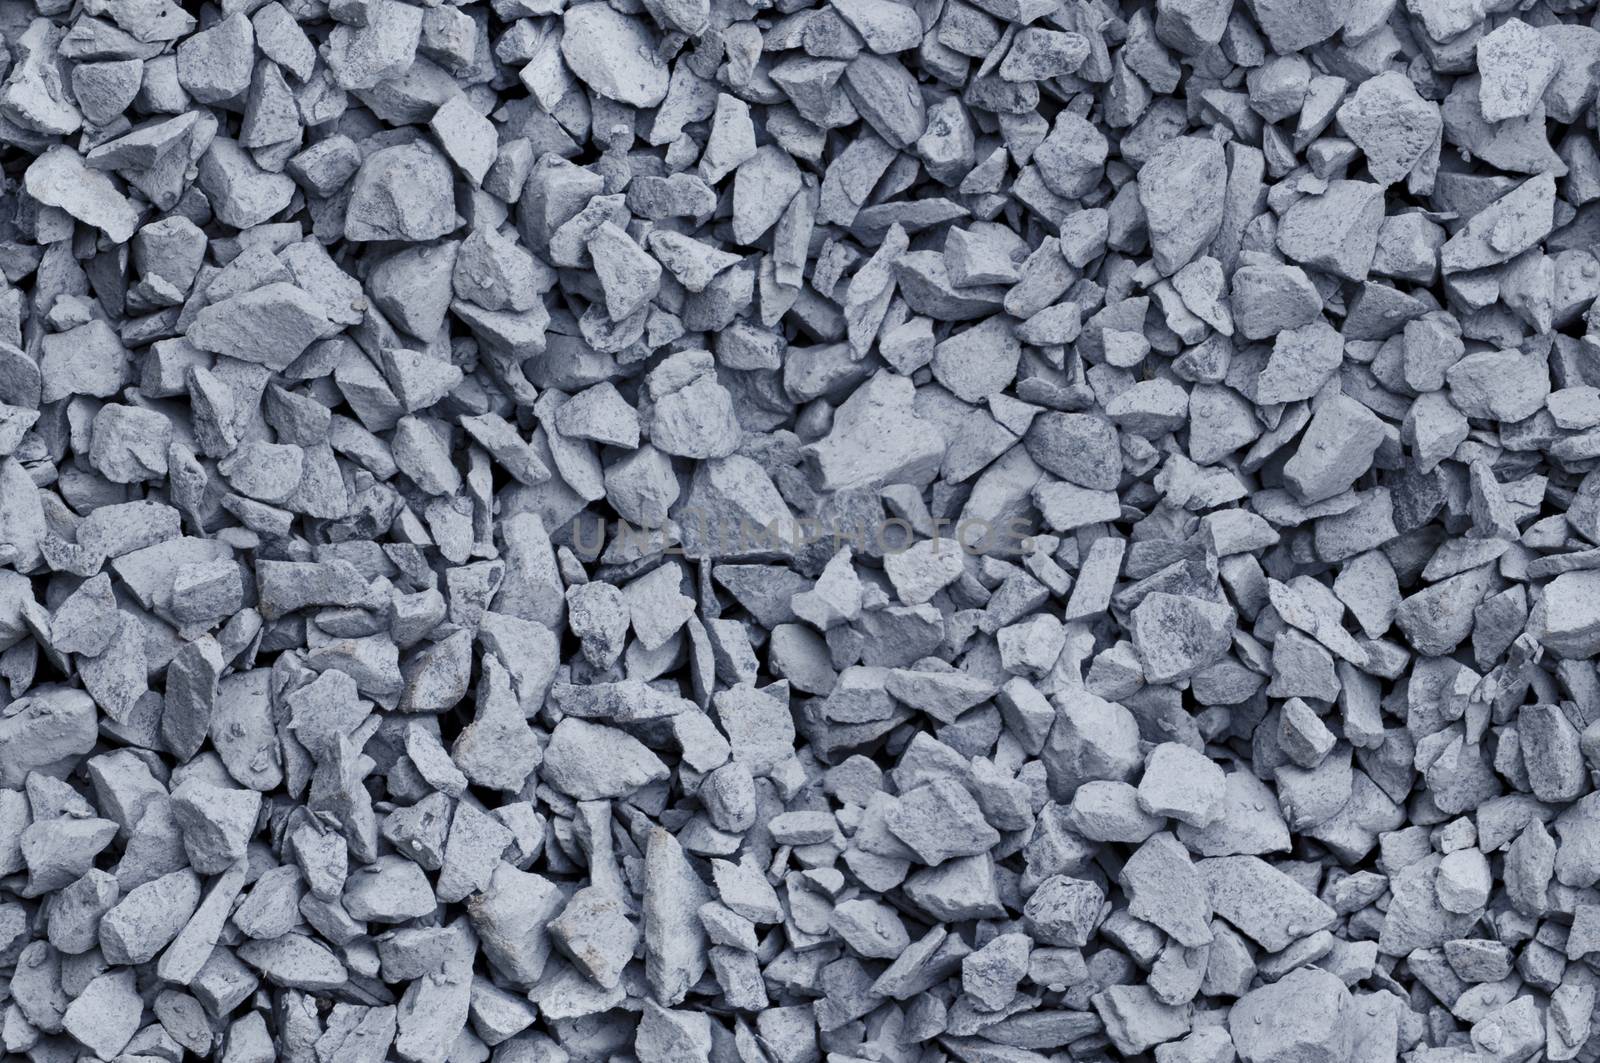 Bluish gray gravel used for construction fill, seamless background texture